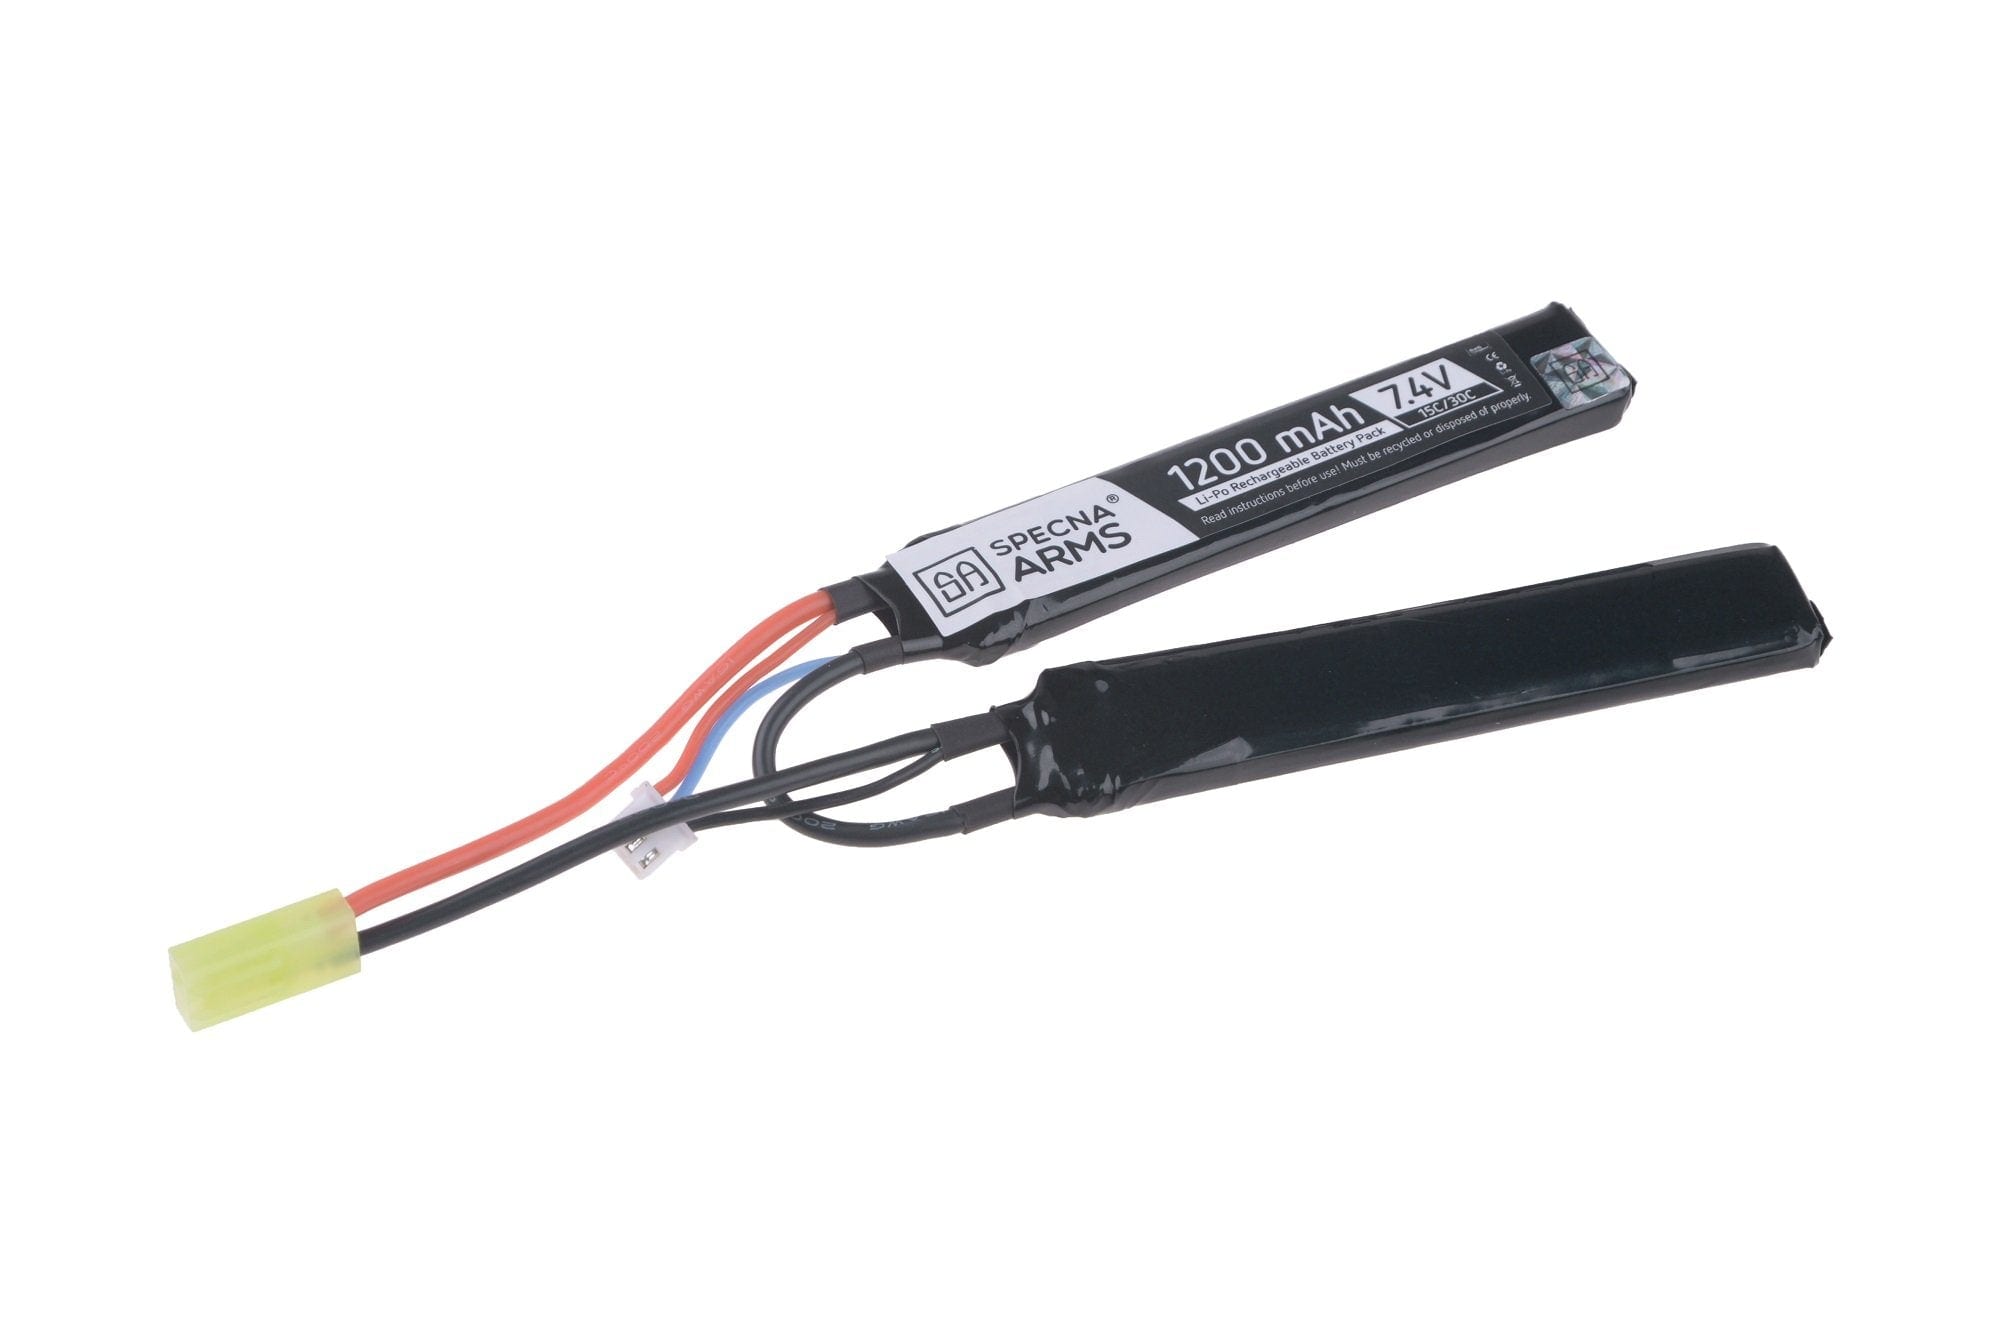 LiPo battery 7.4V 1200mAh 15 / 30C - Module 2 by Specna Arms on Airsoft Mania Europe